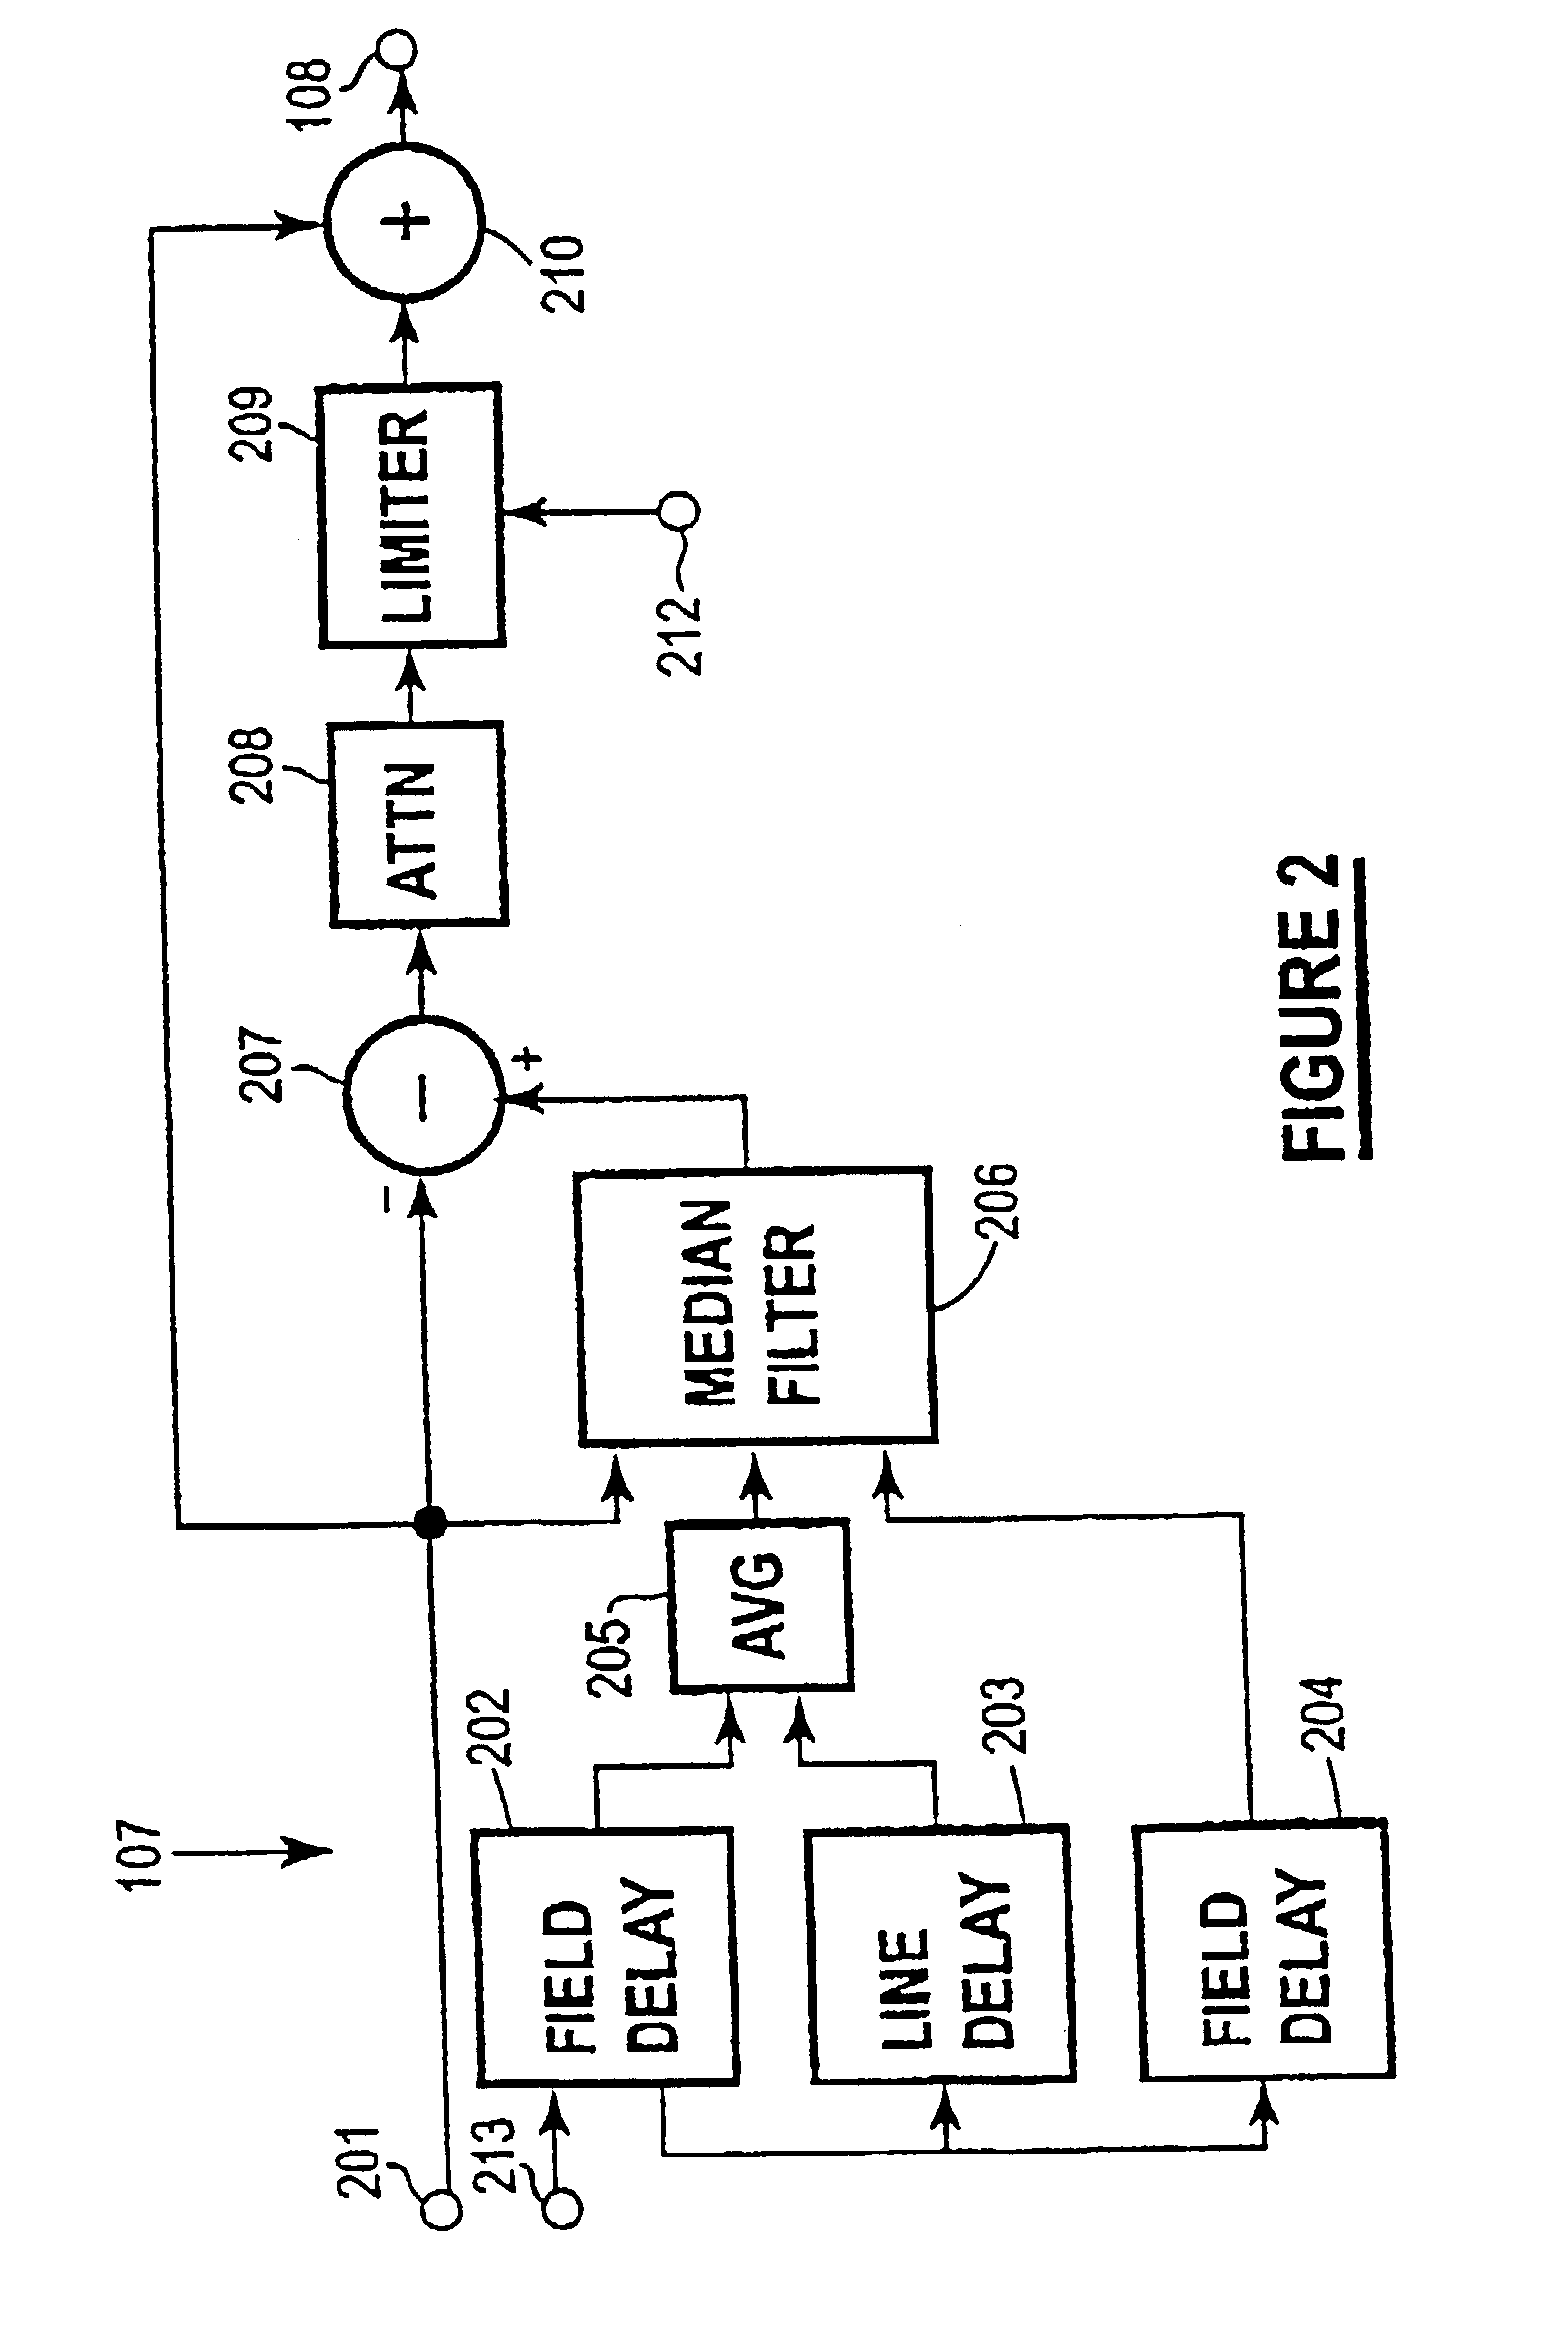 Spatio-temporal video noise reduction system